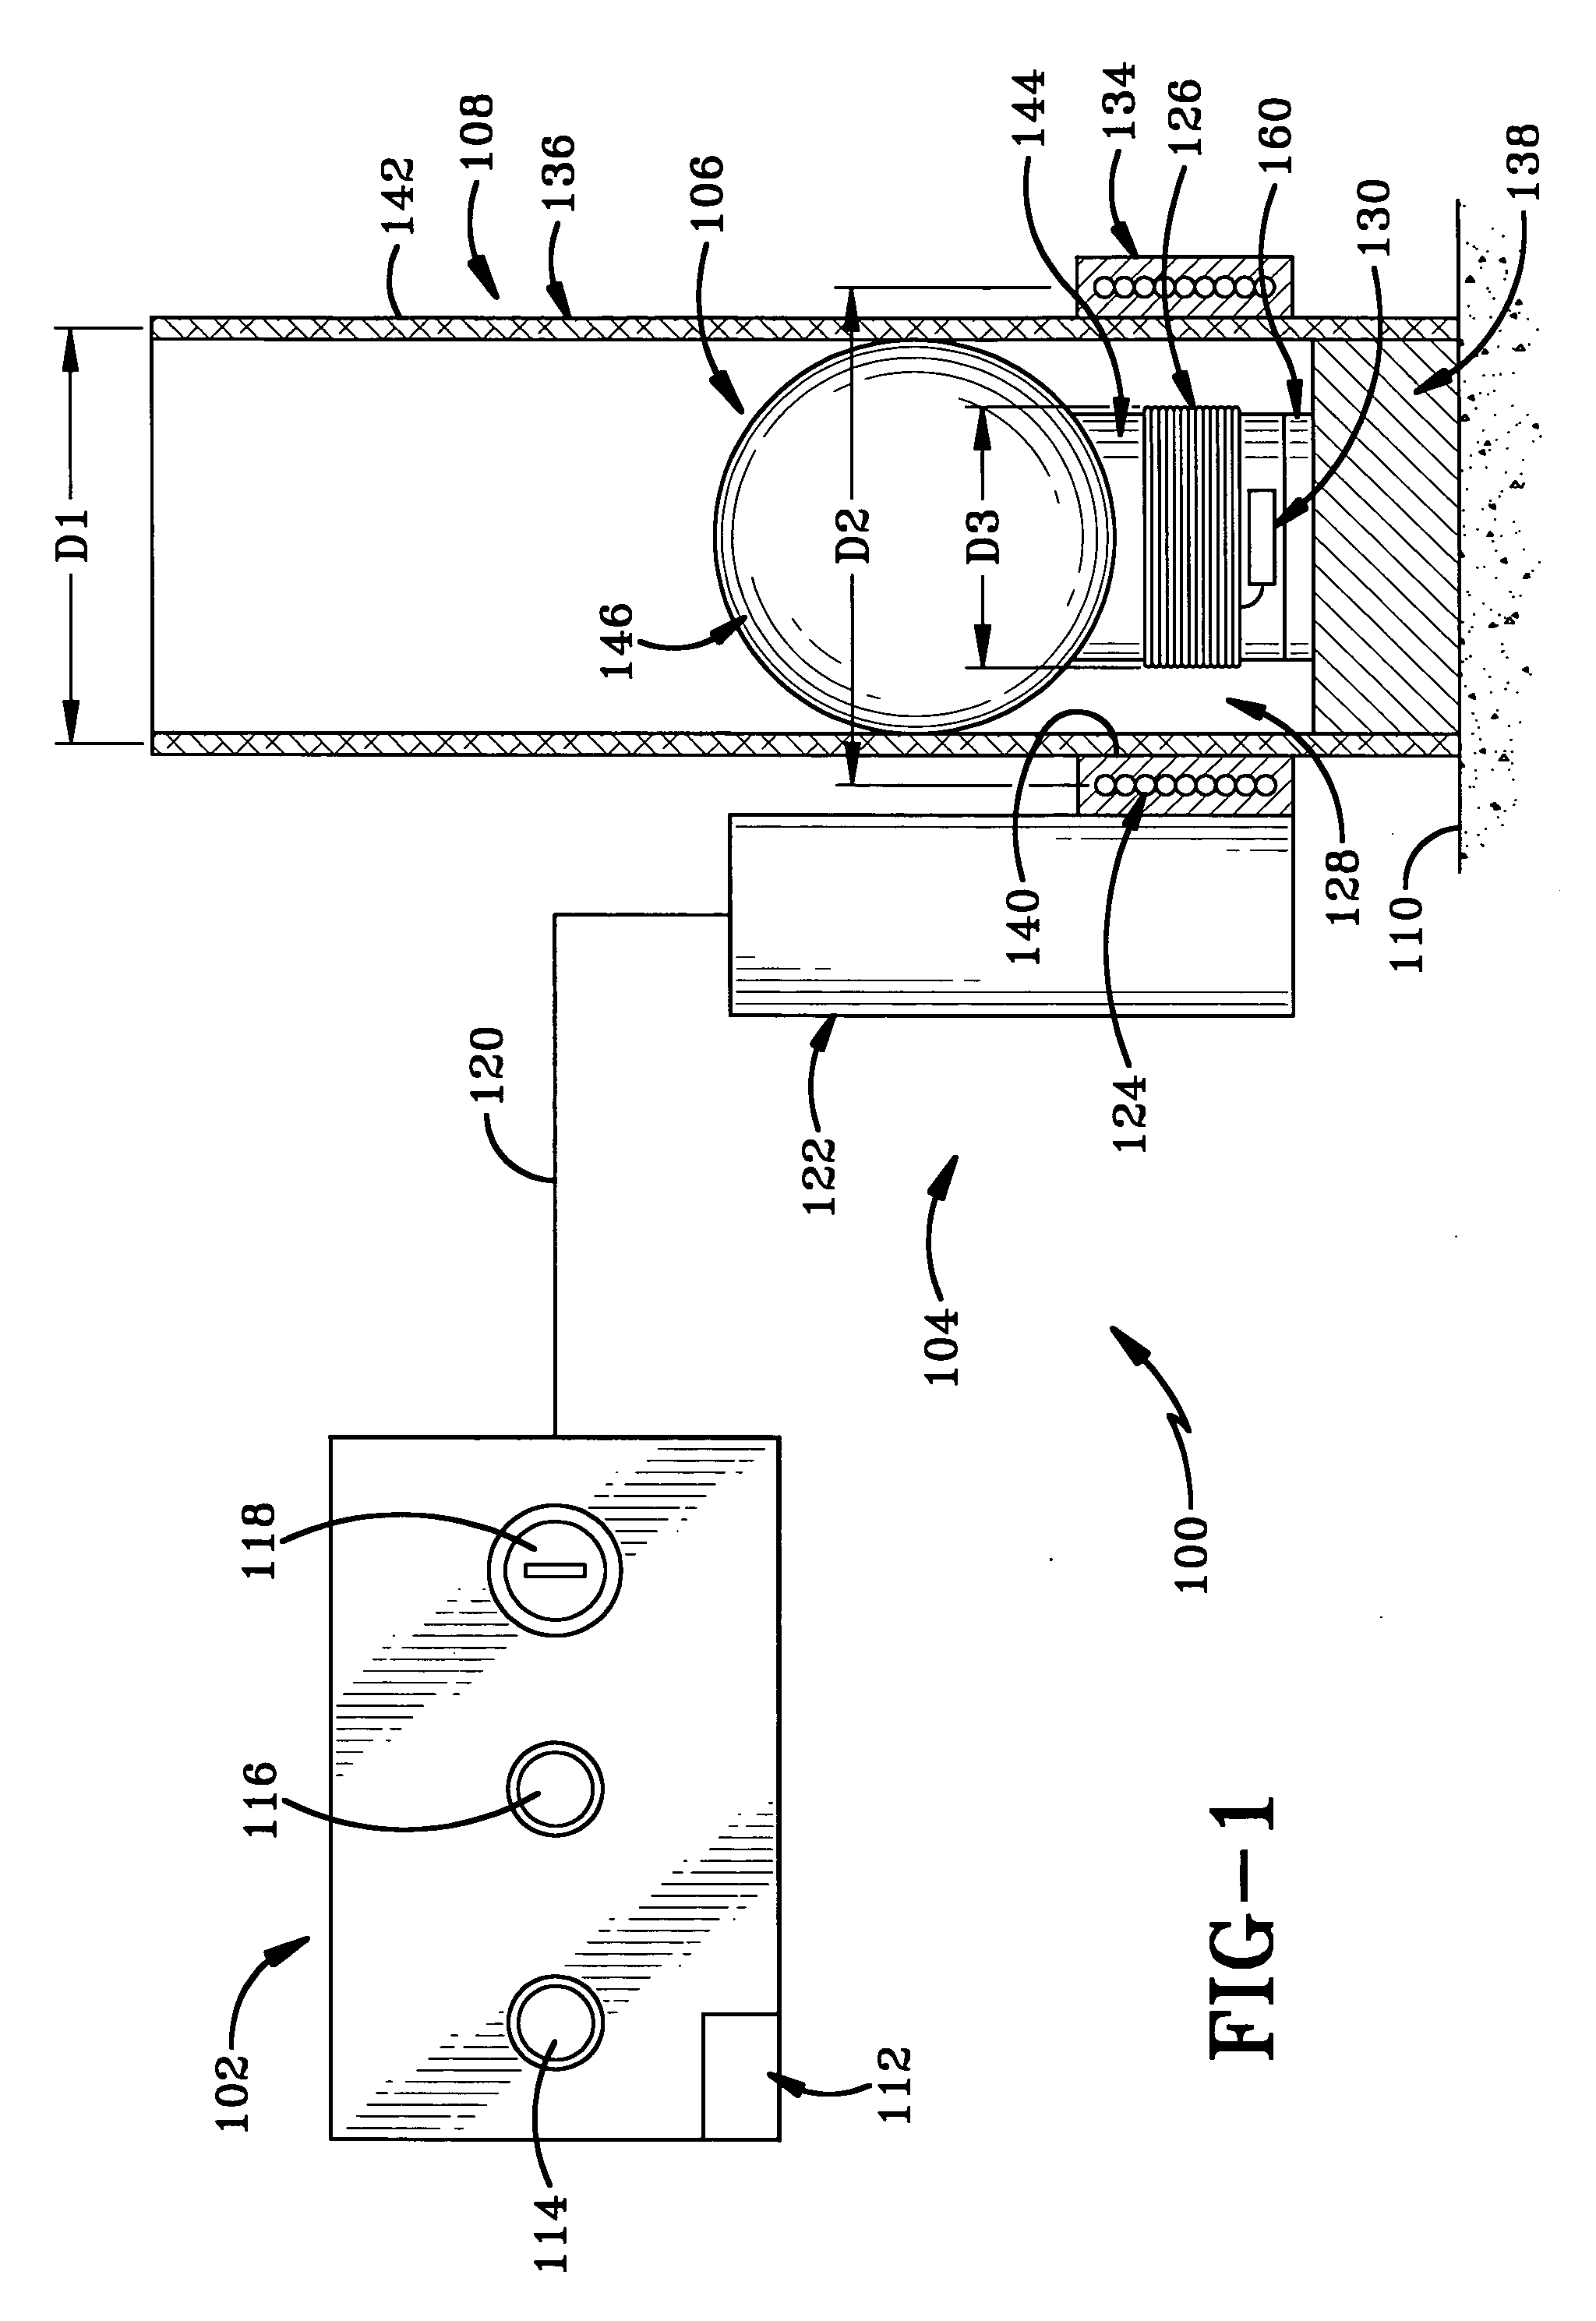 Remotely controlled ignition system for pyrotechnics